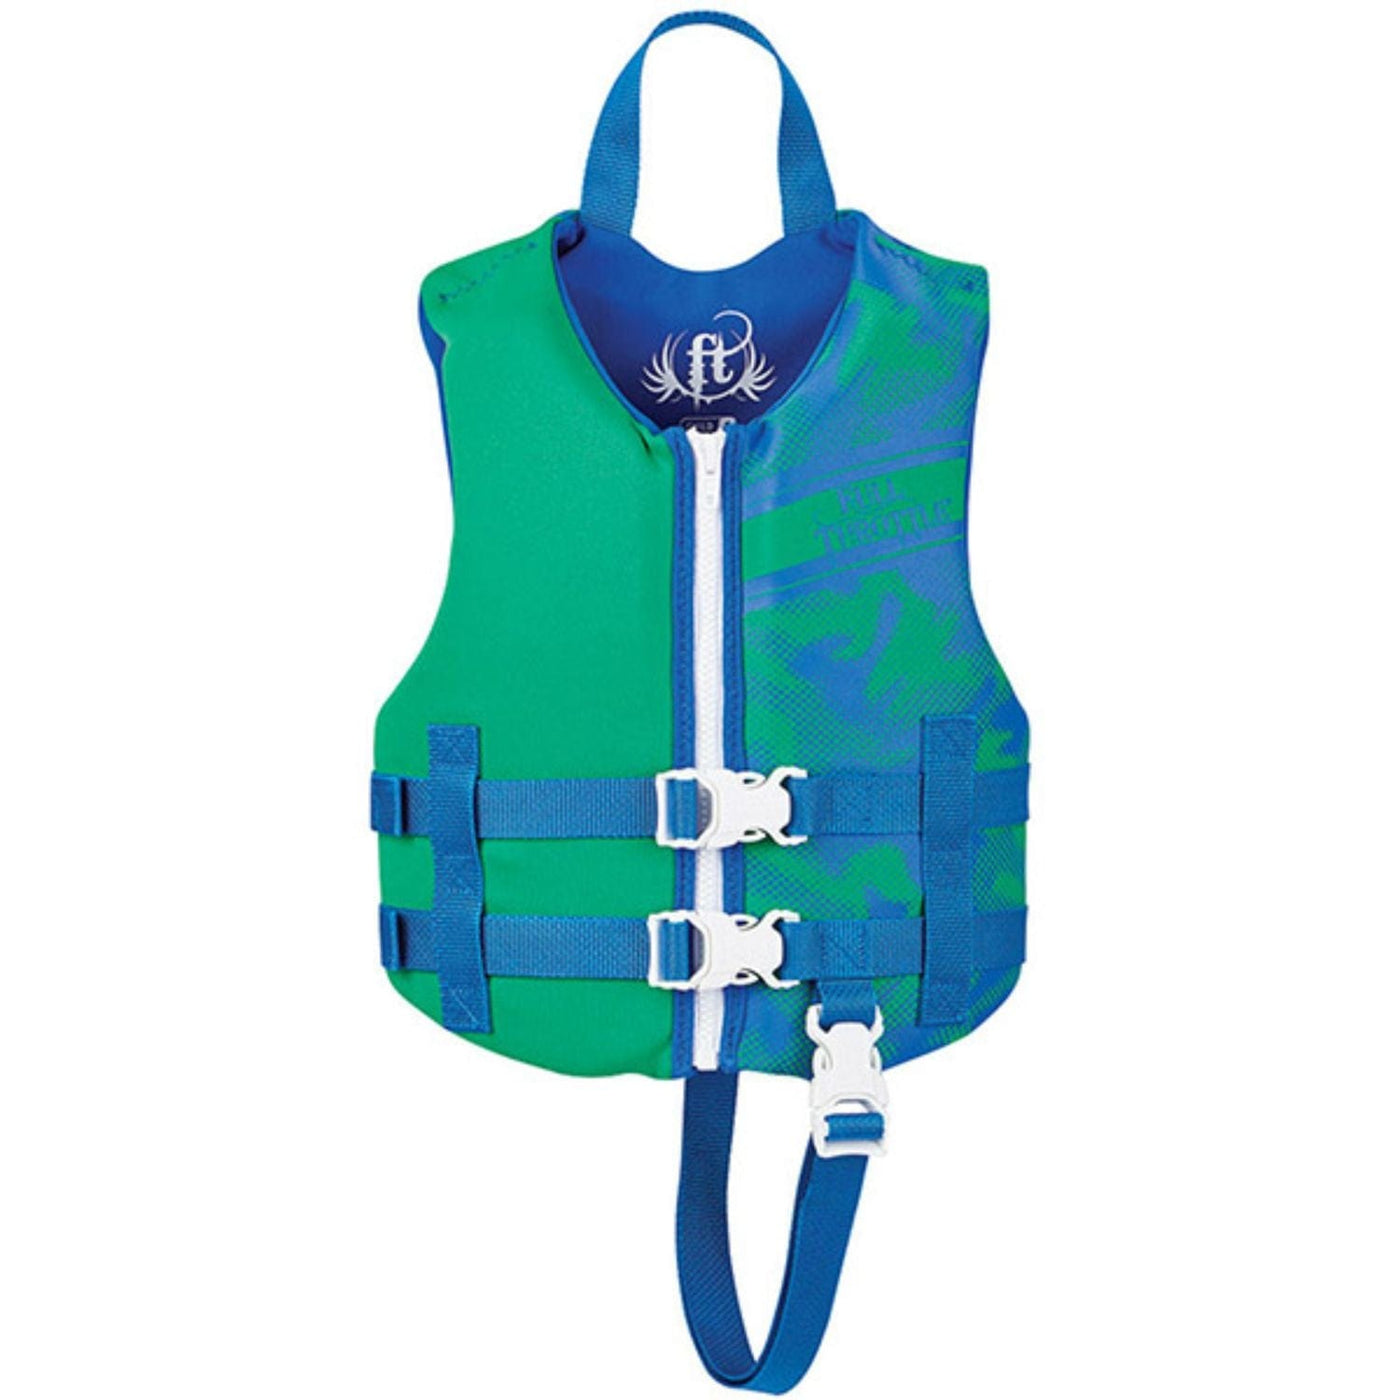 Full Throttle Full Throttle Child Life Jacket Rapid-Dry-Green Marine And Water Sports